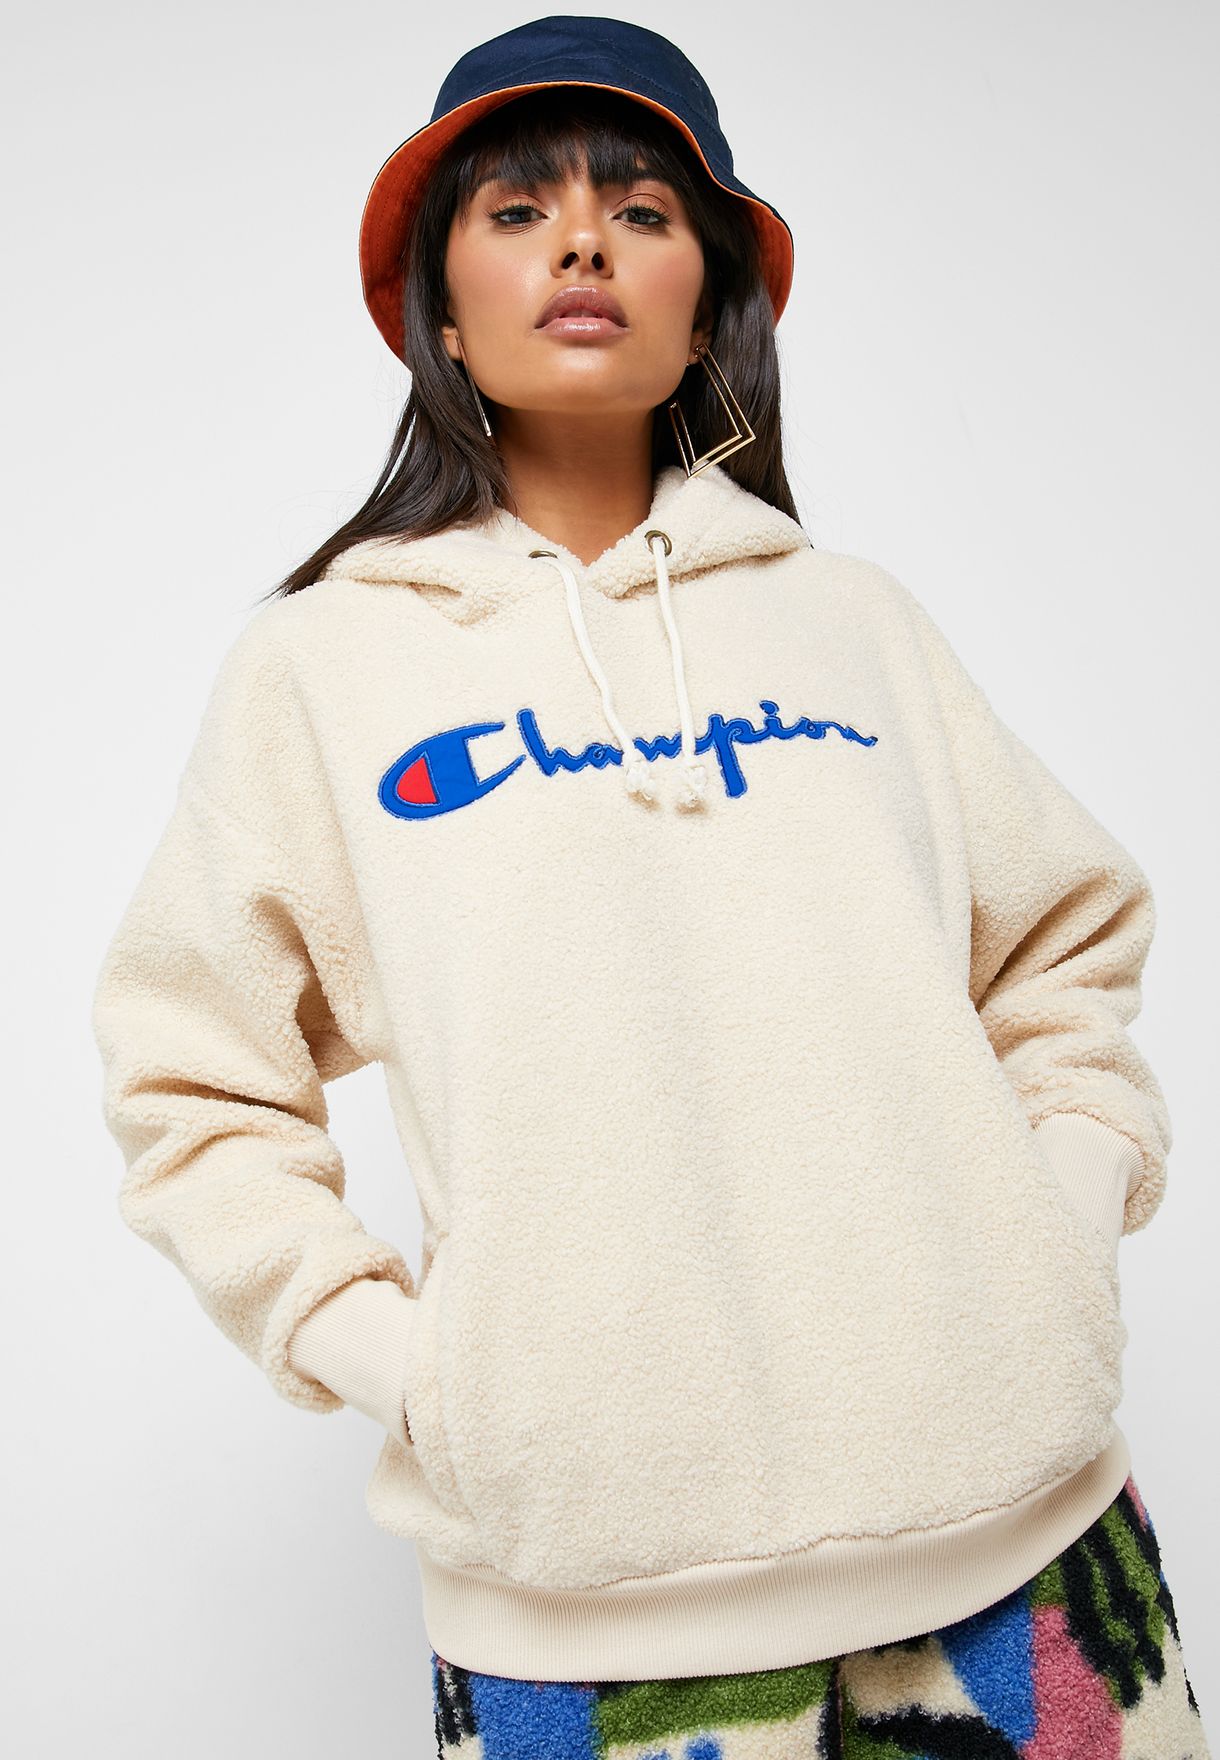 champion hoodie womans